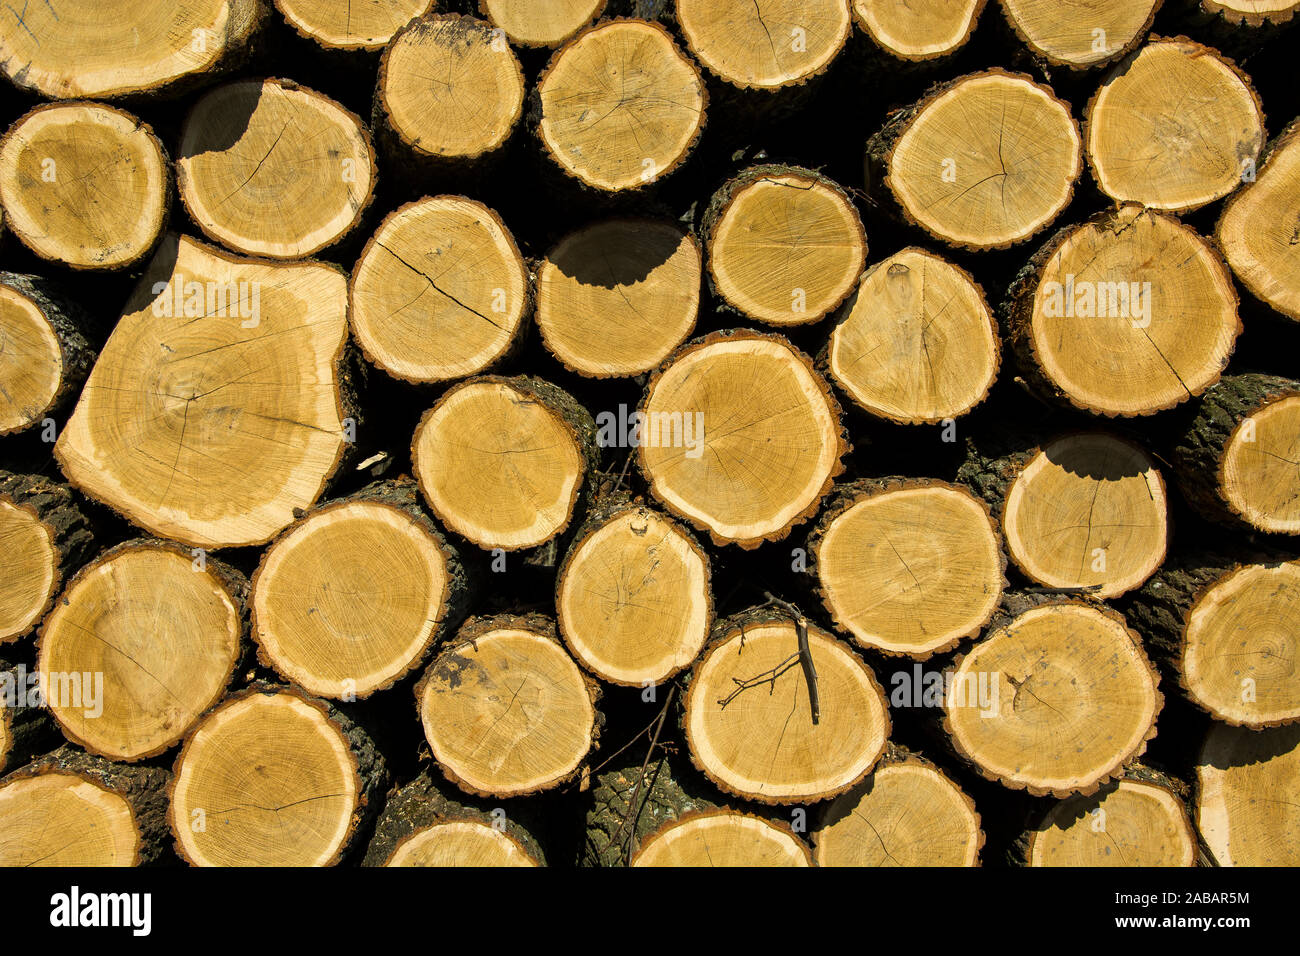 Cut tree trunks in a pile Stock Photo